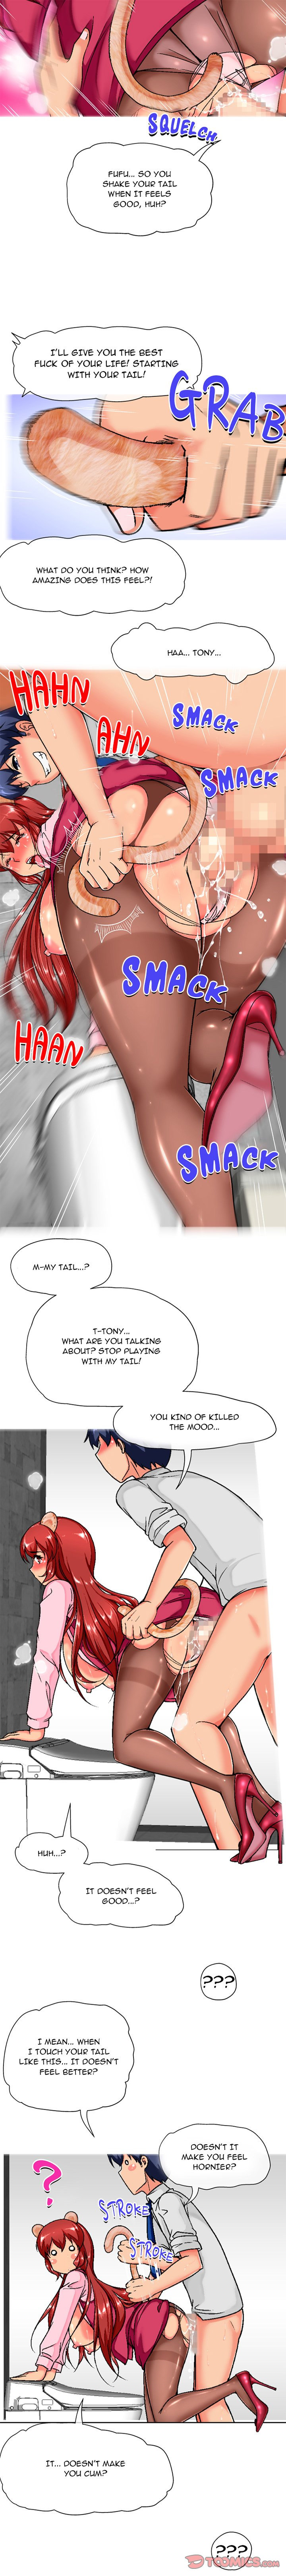 A Tale of Tails - Chapter 4 Page 9